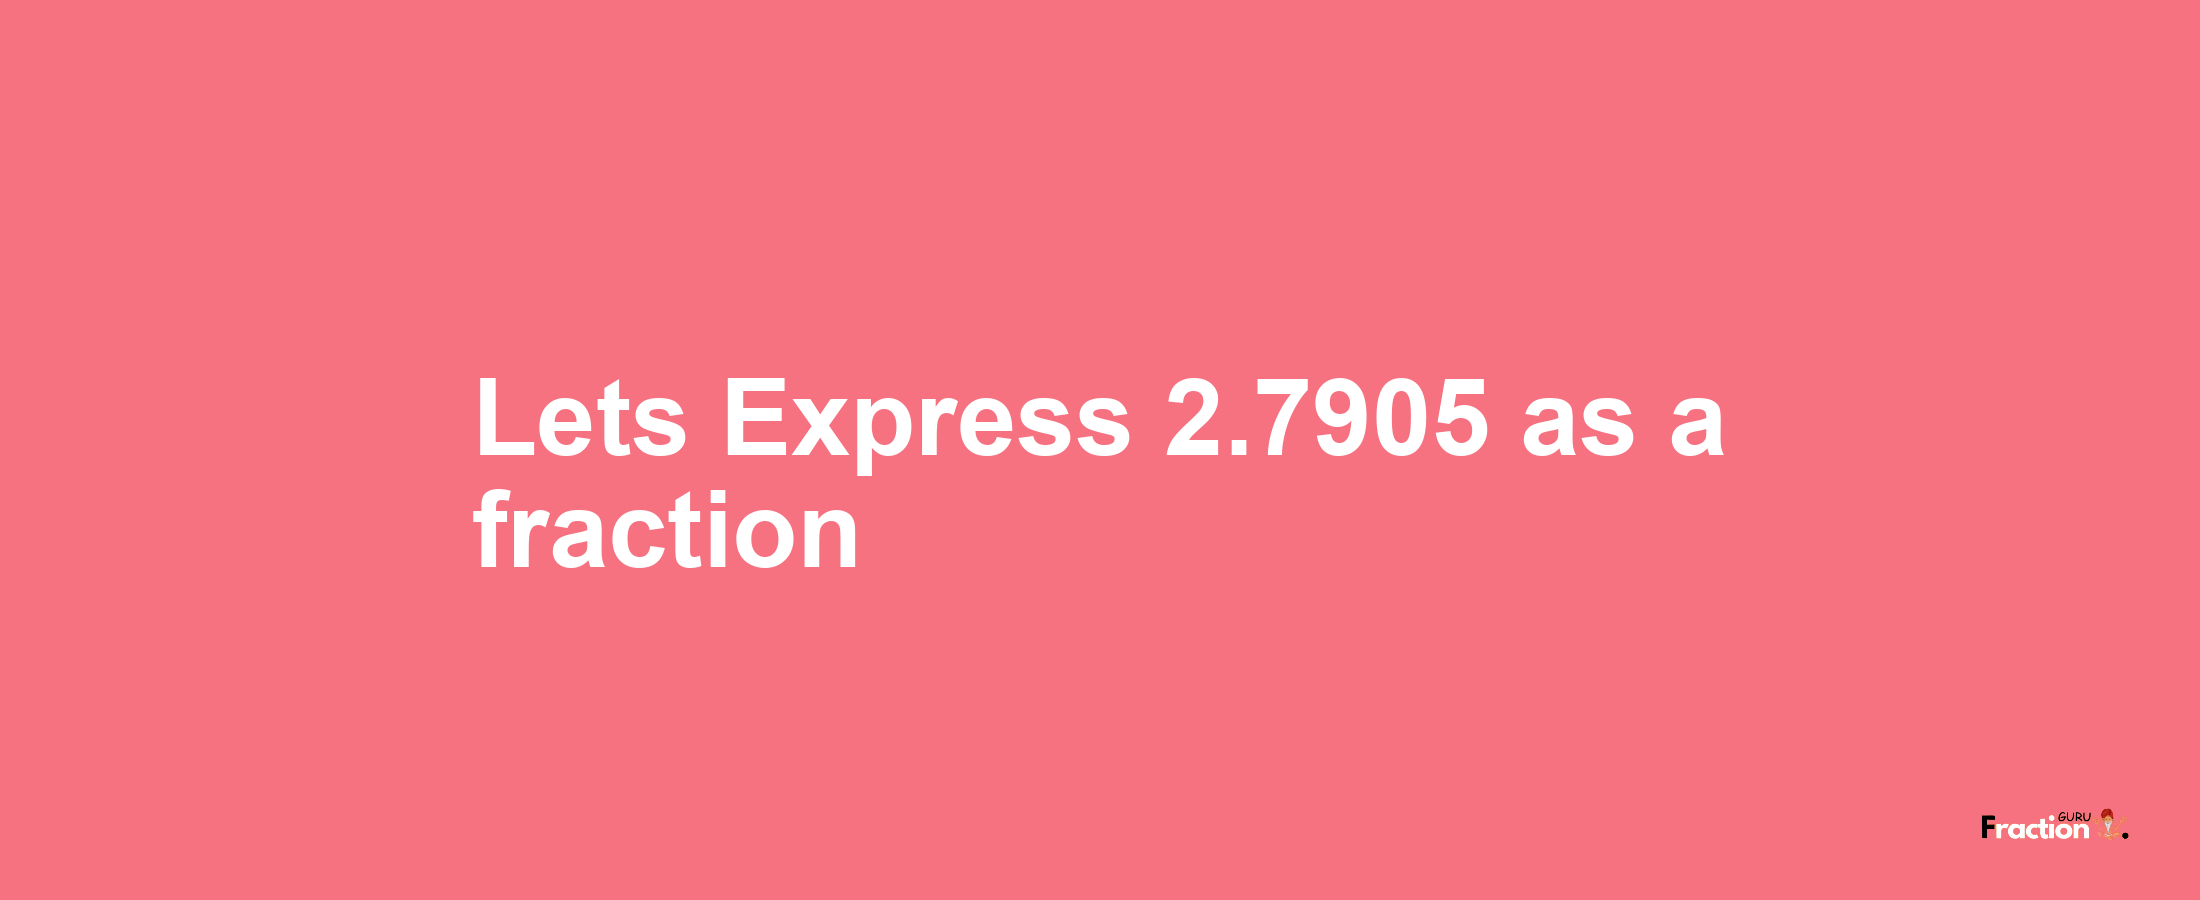 Lets Express 2.7905 as afraction